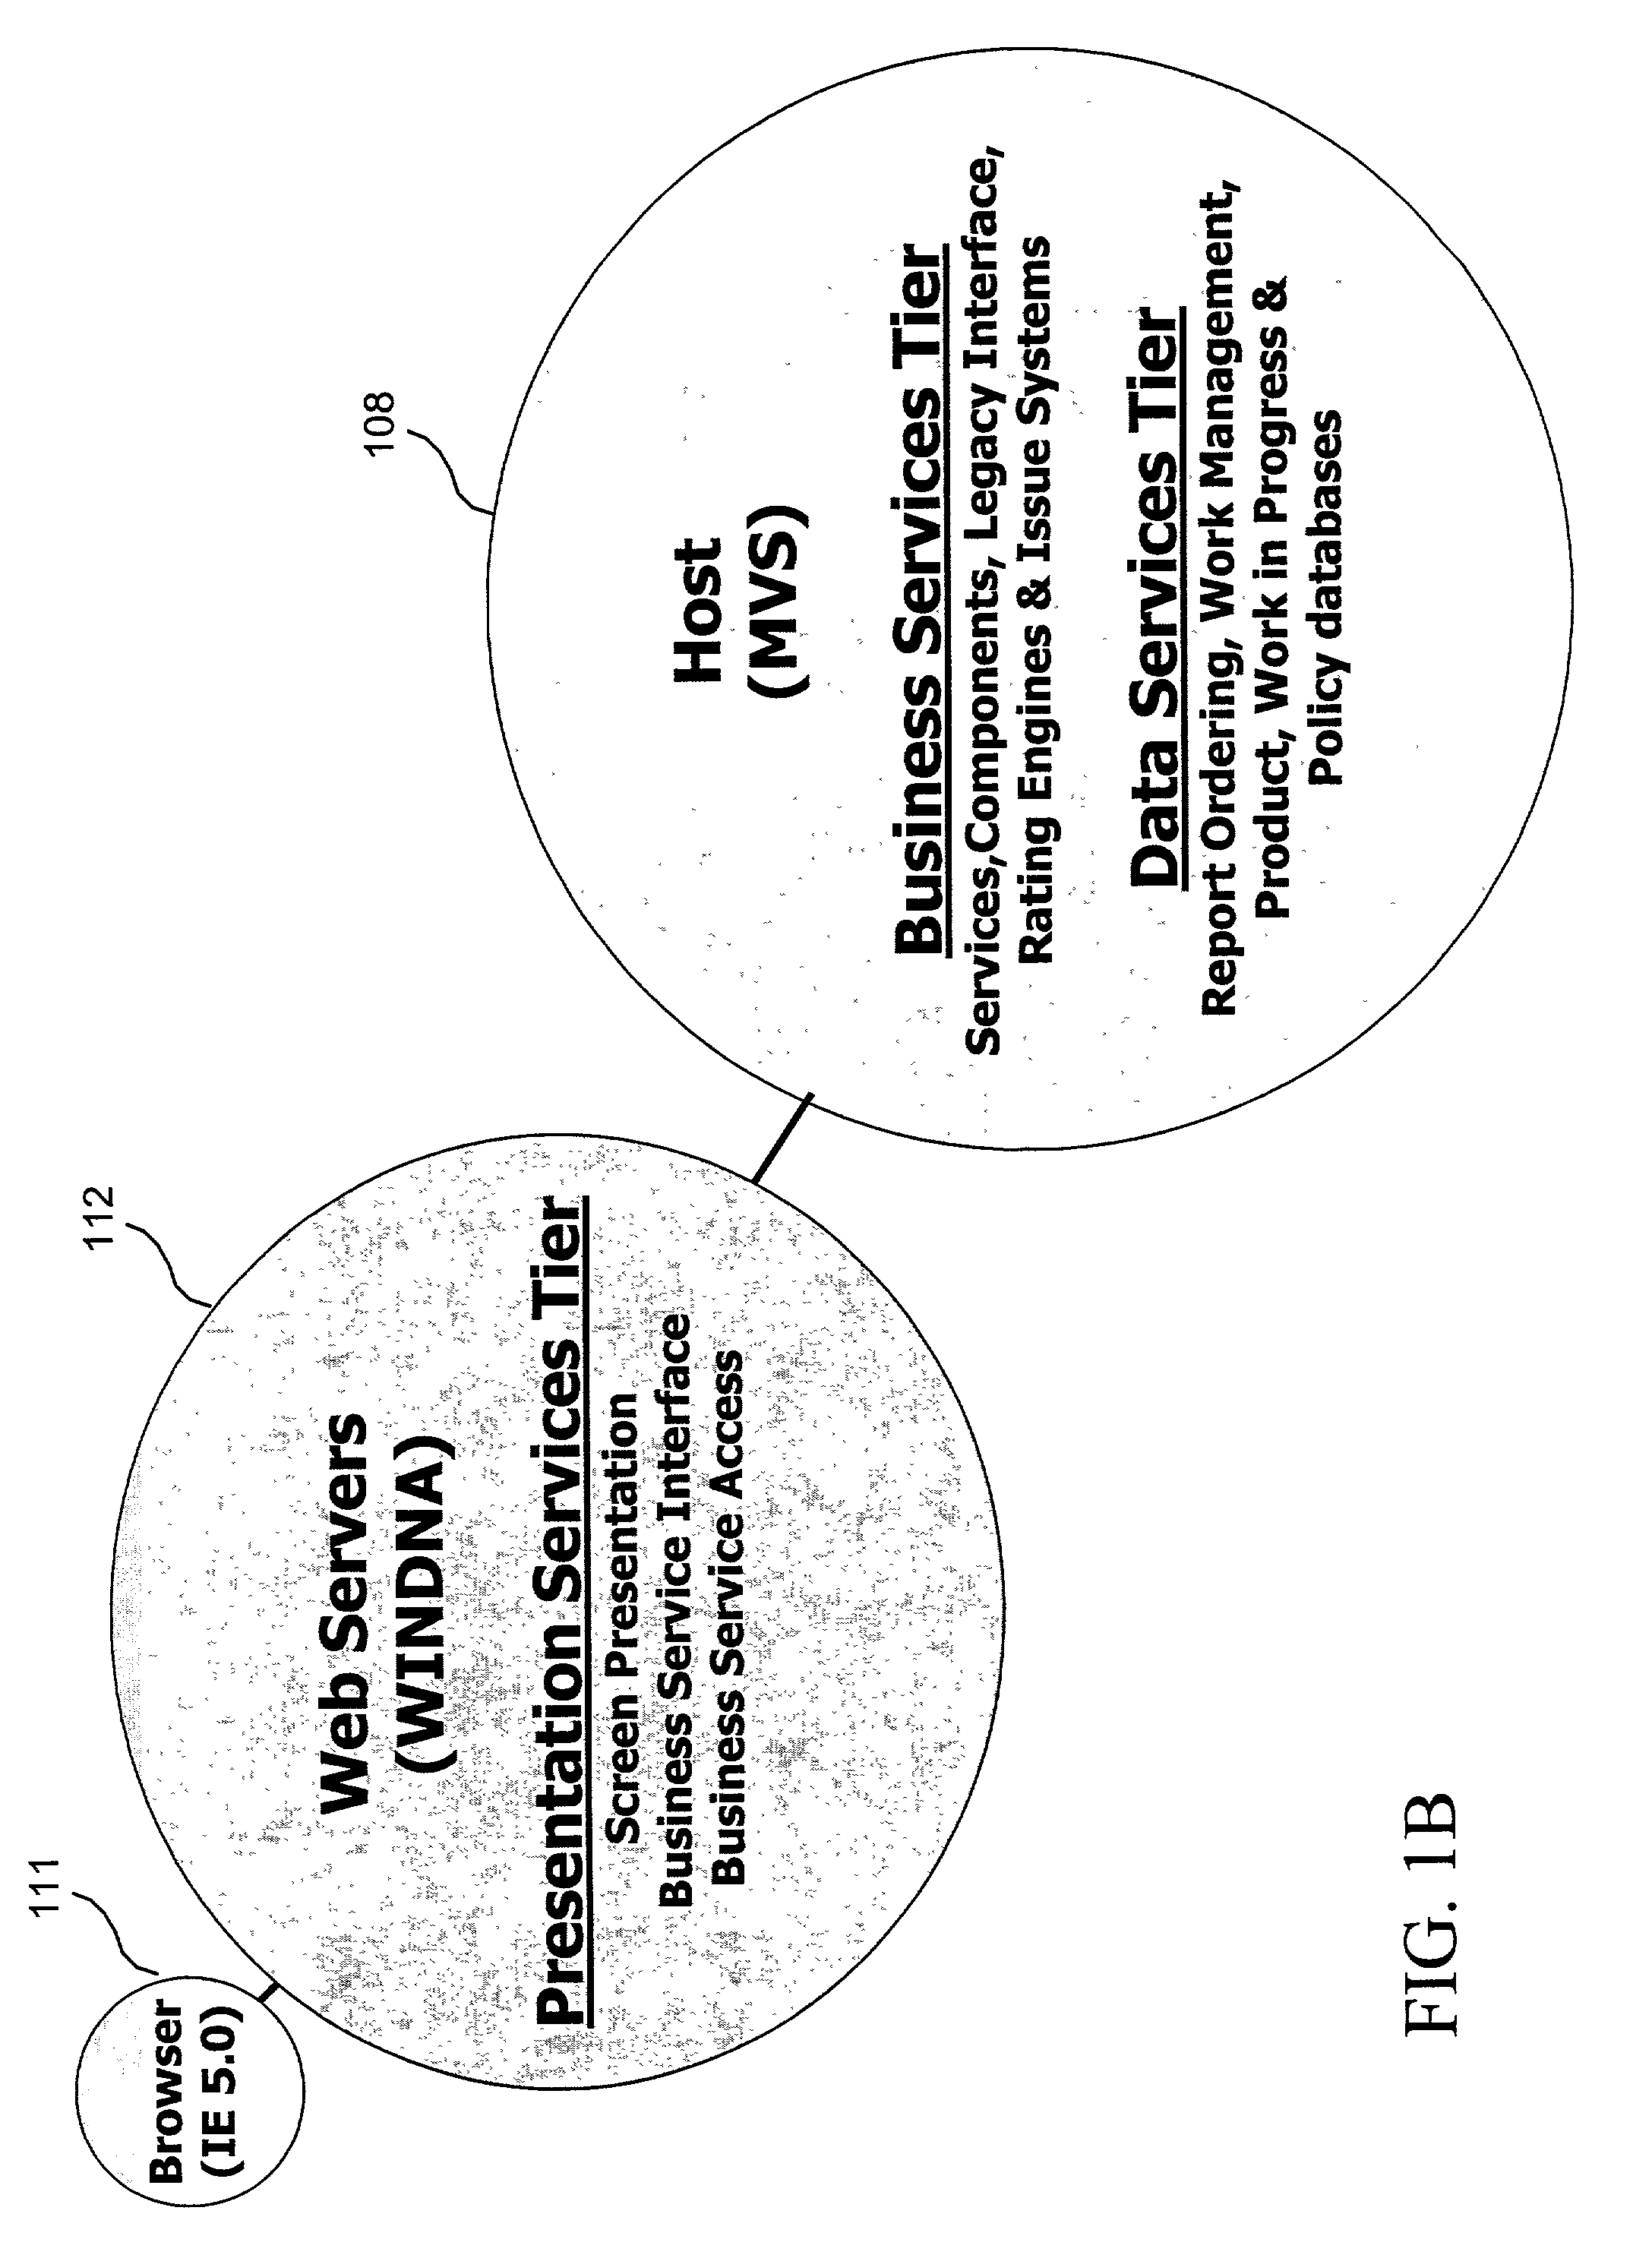 Method for providing web-based insurance data processing services to users